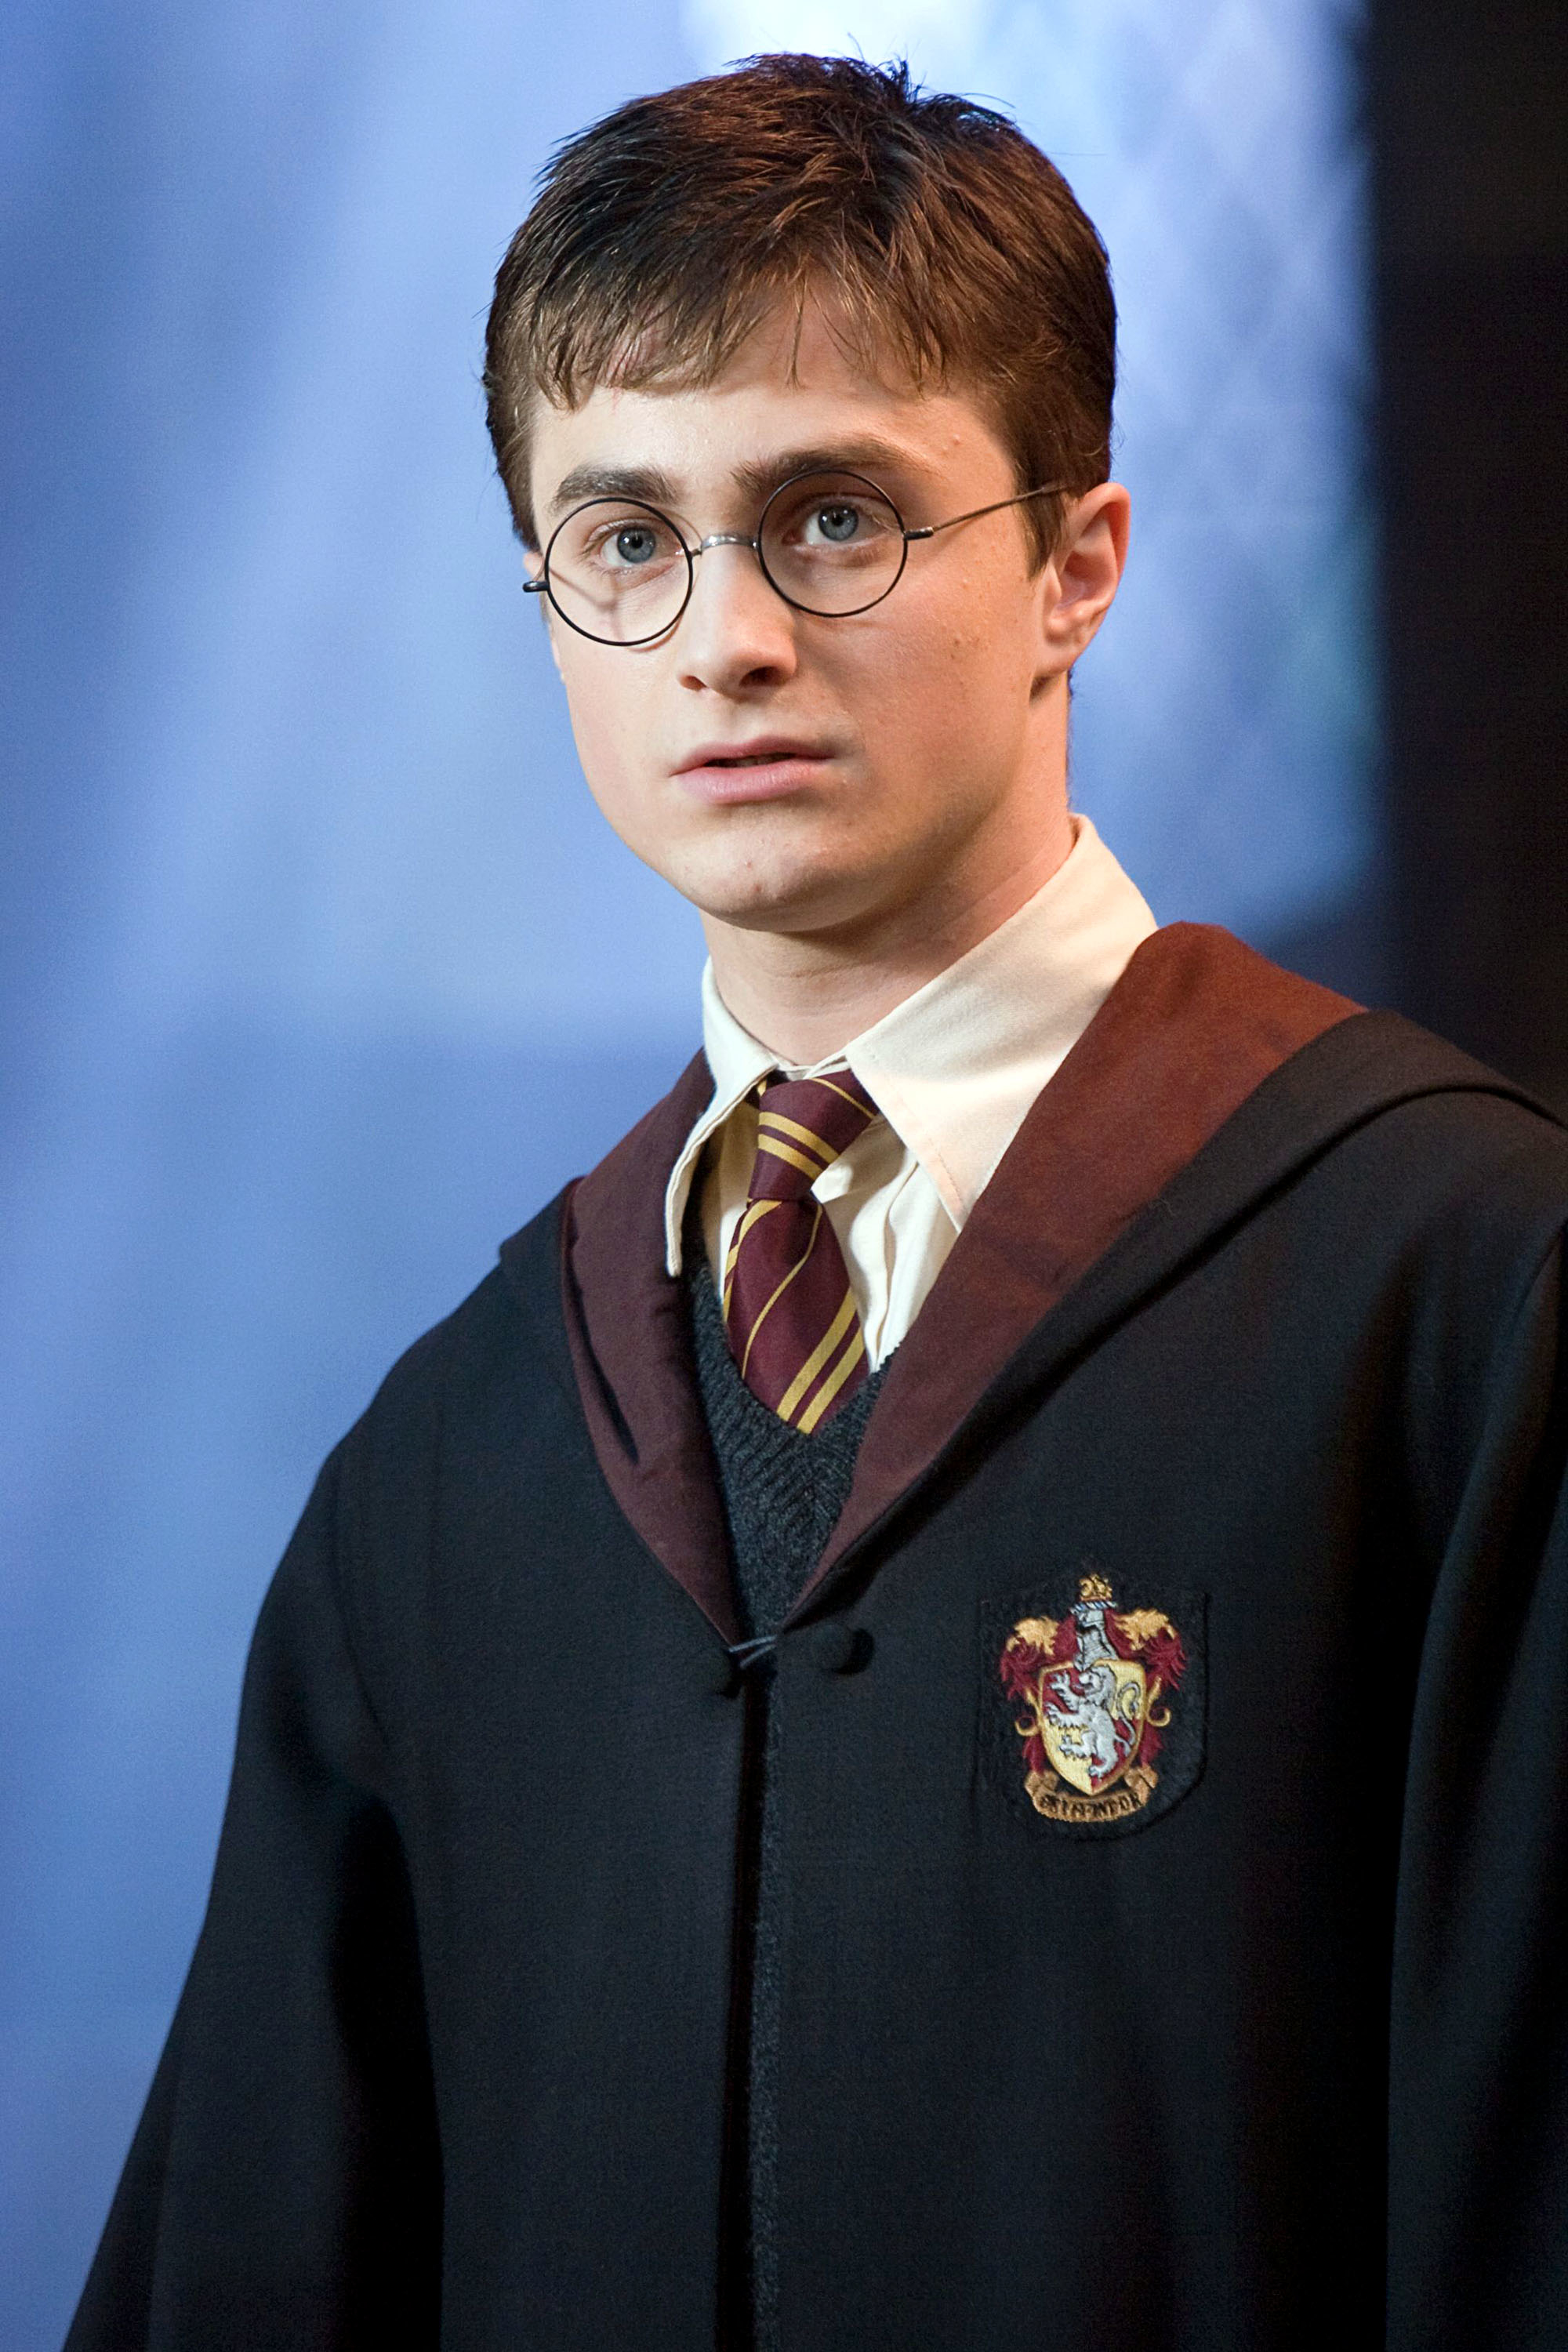 Daniel Radcliffe as Harry Potter in a Hogwarts uniform with glasses and a Gryffindor tie